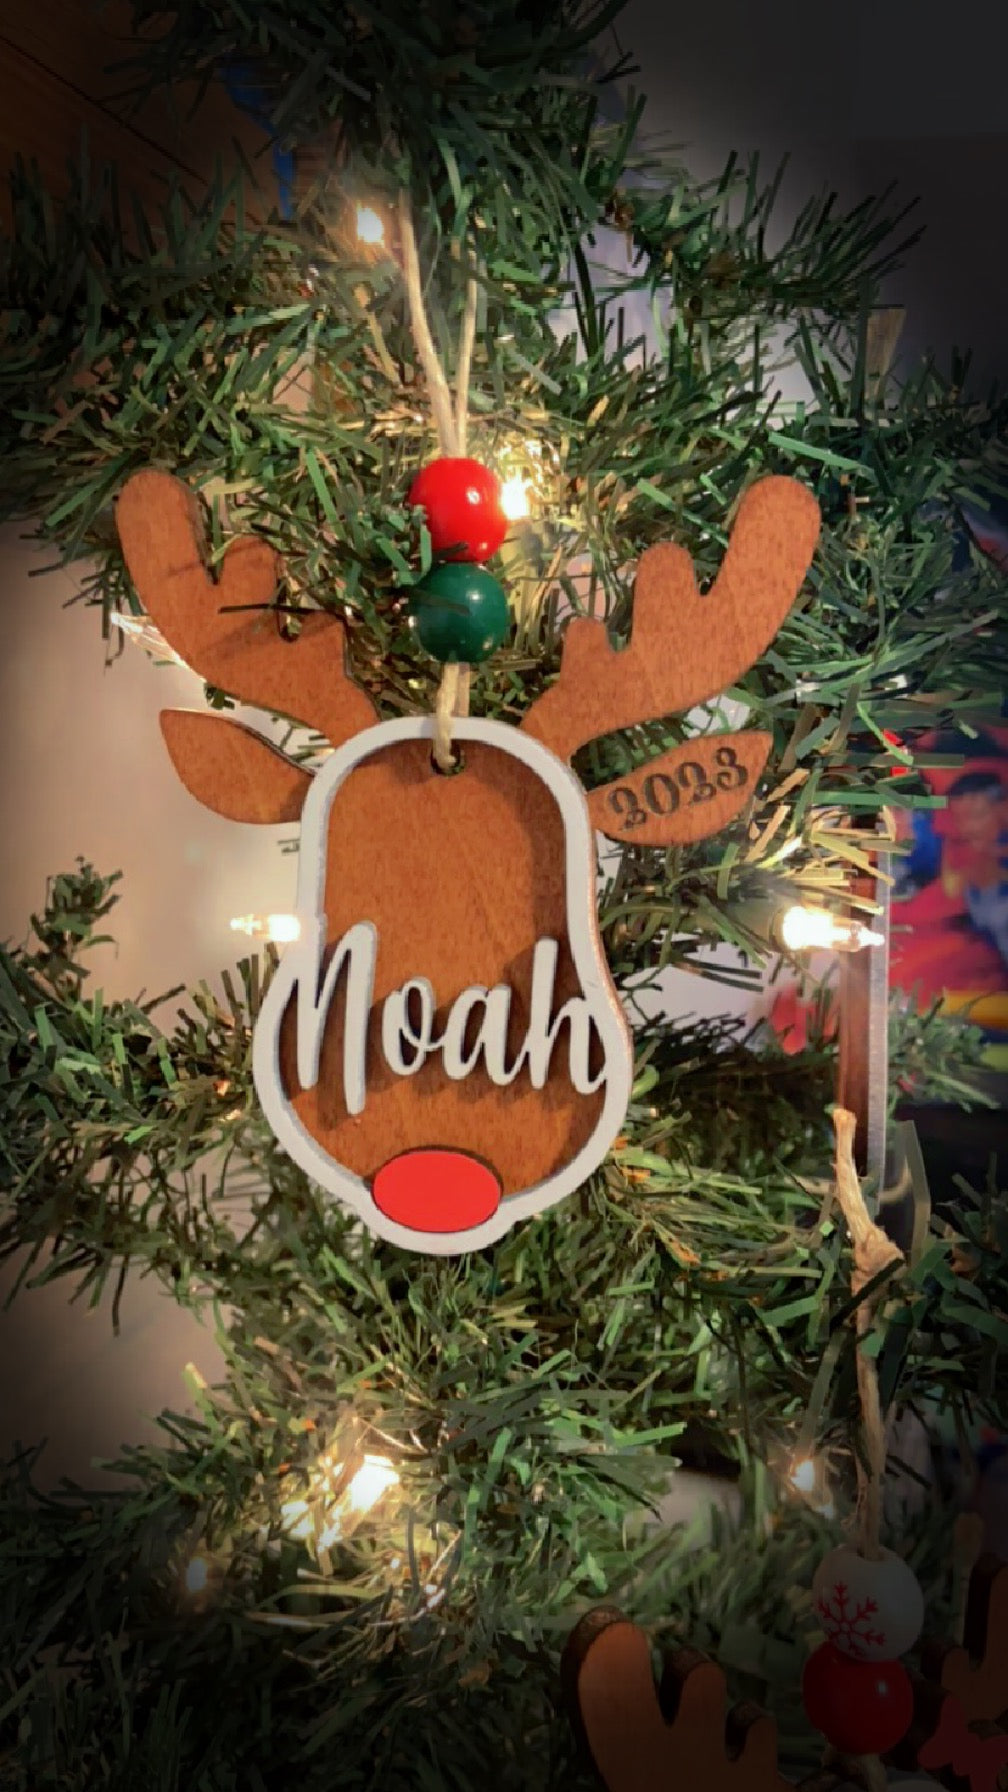 Personalized reindeer, ornaments